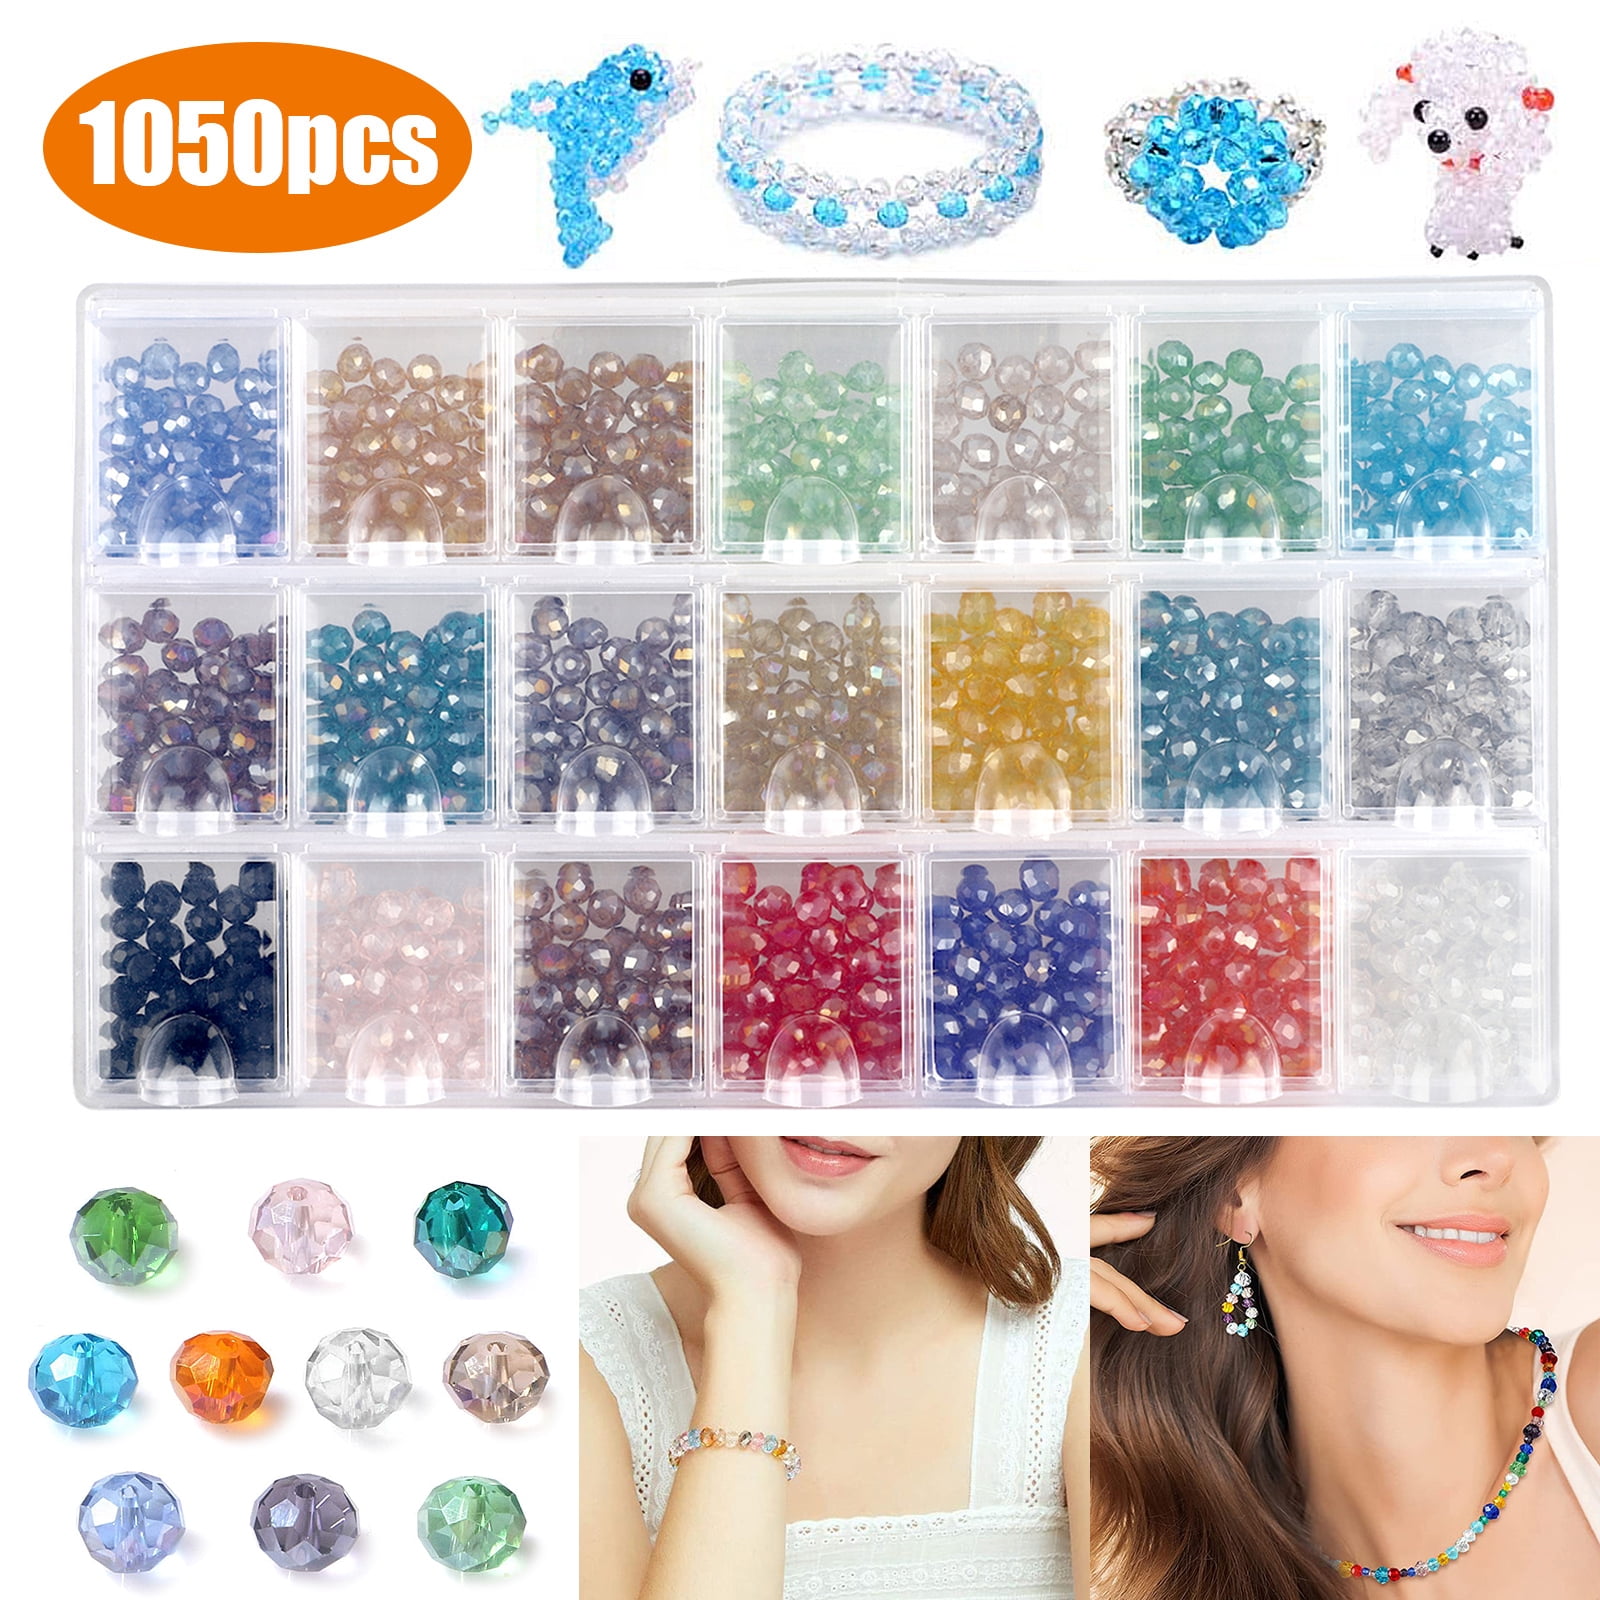 Dowarm 300 Pieces 6mm Crystal Glass Beads Briolette Beads for Jewelry Making Briolette Spacer Beads Rainbow, 6MM Rondelle Crystal Beads for Crafts Wine Charms Wind Chimes Suncatchers 